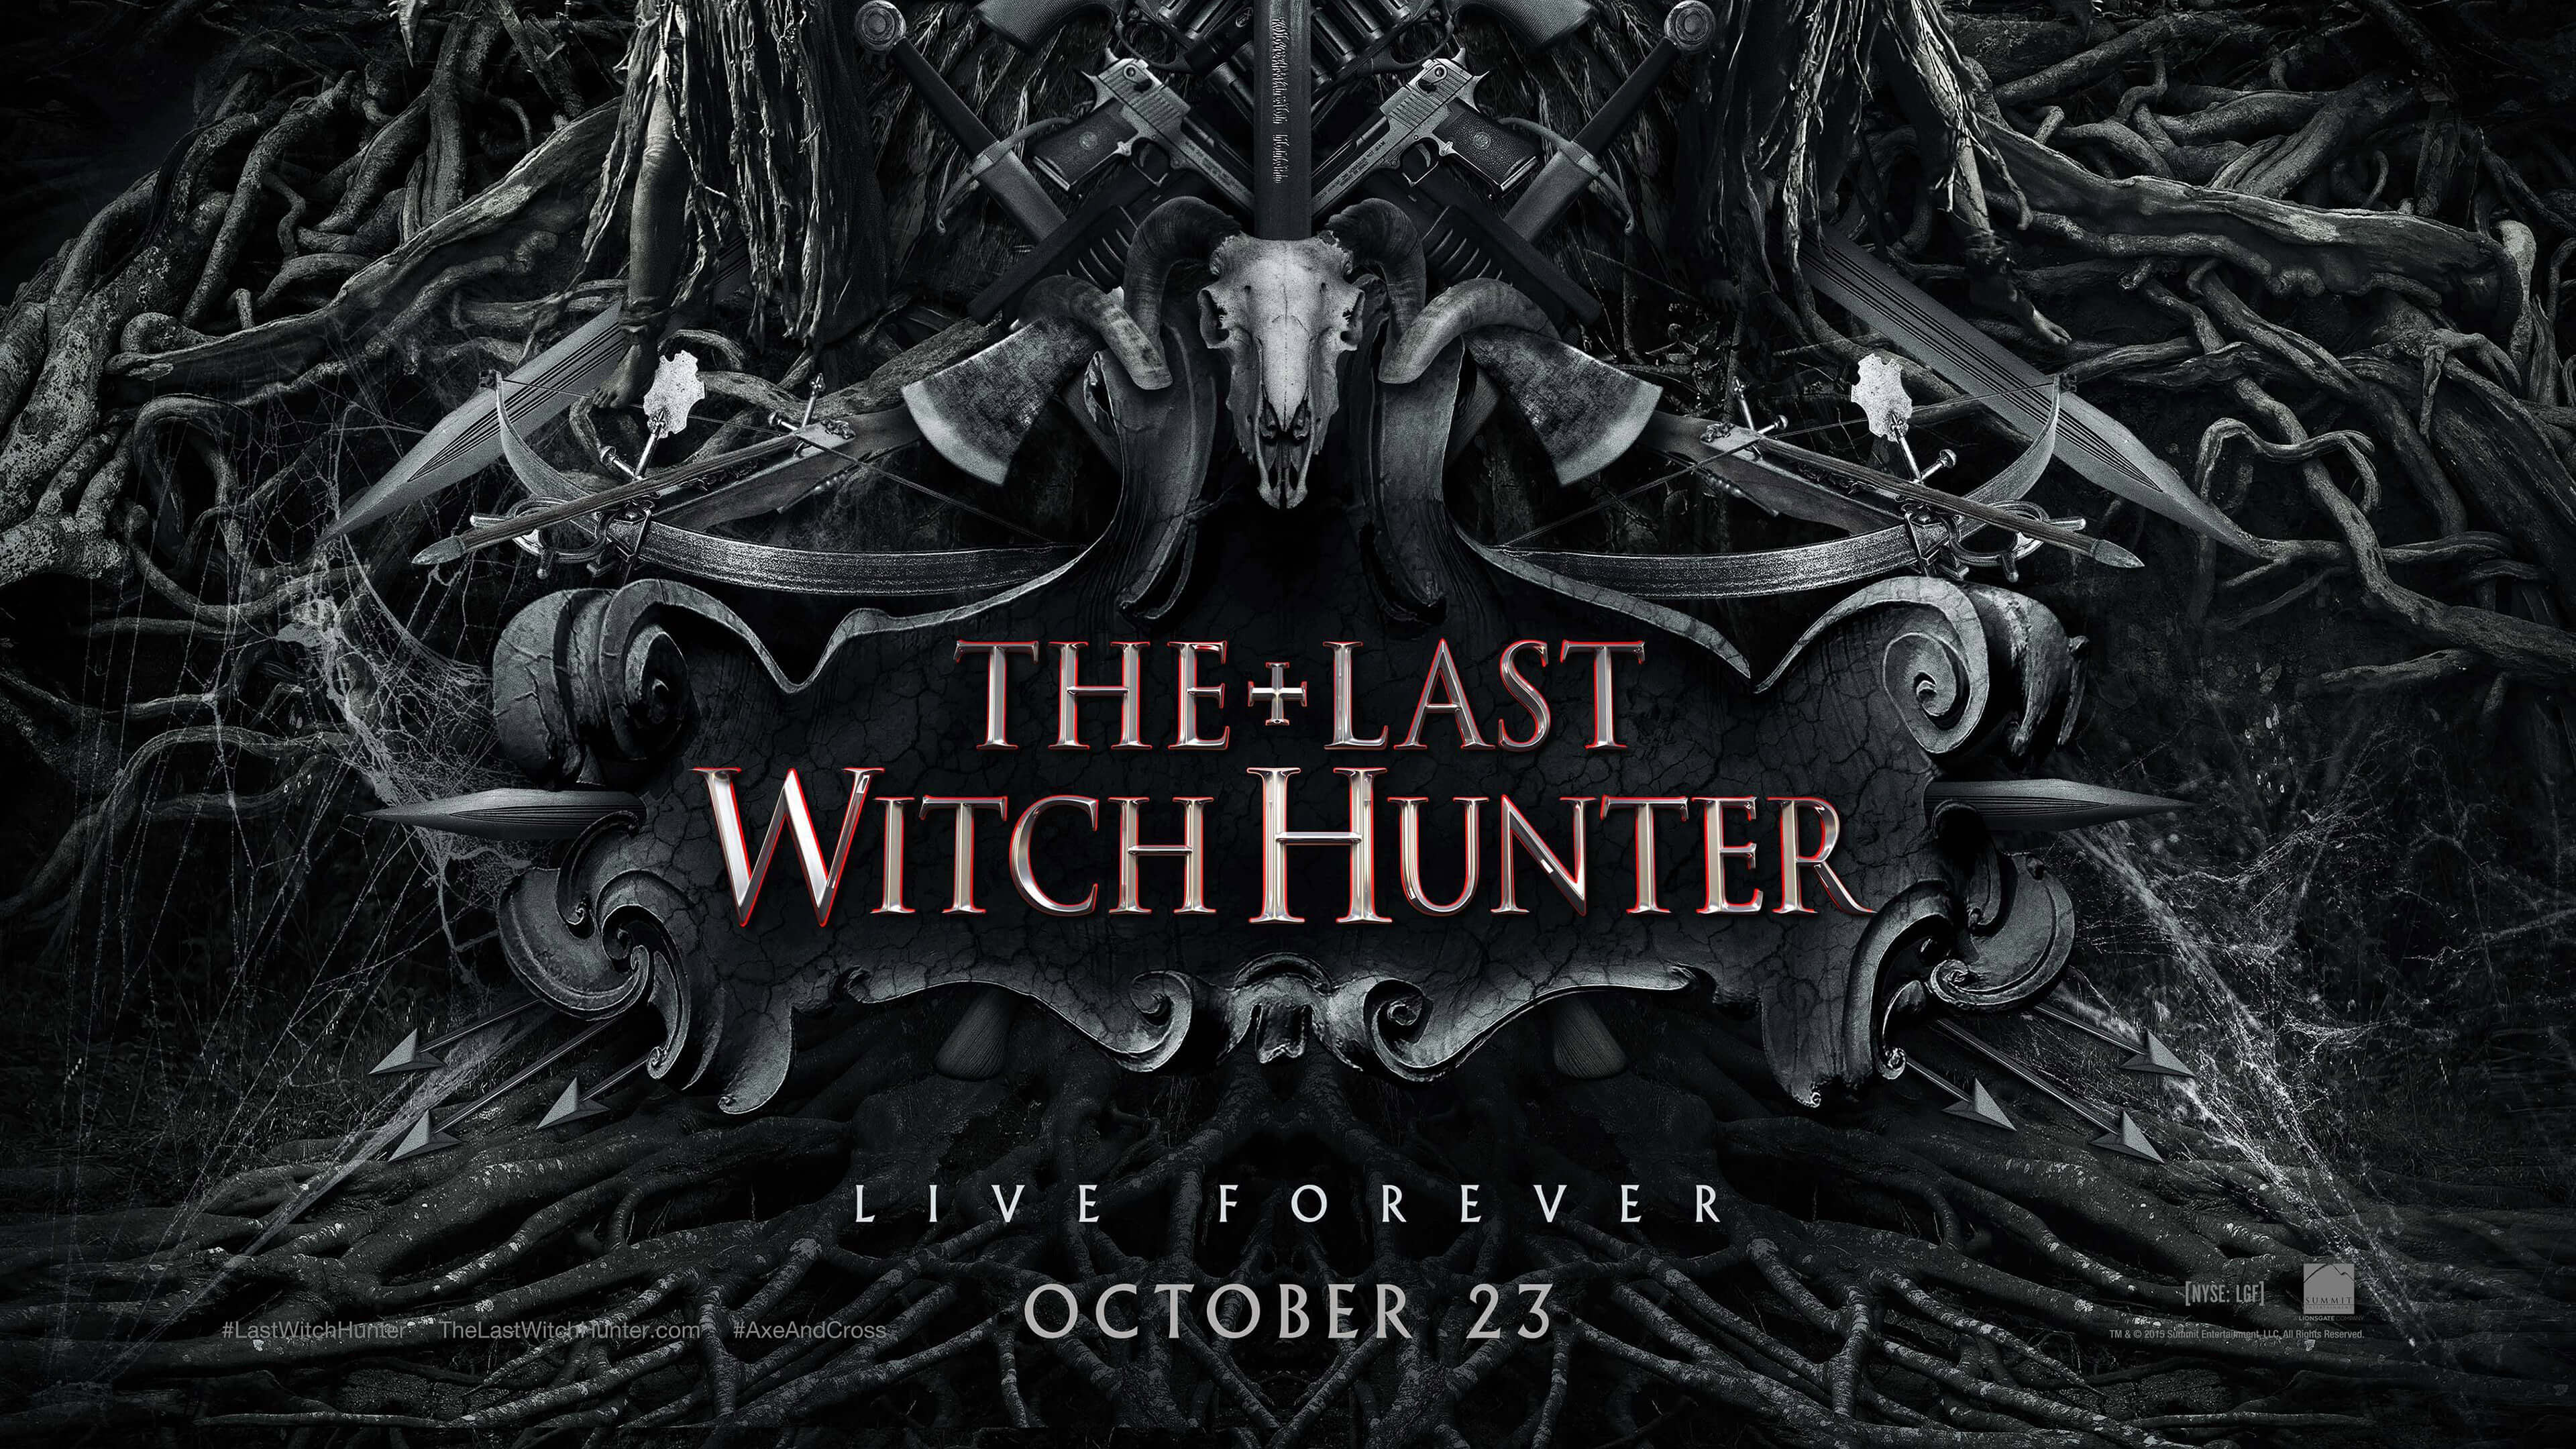 Free download The Last Witch Hunter 2015 Ultra HD Movie Poster Wallpaper [3840x2160] for your Desktop, Mobile & Tablet. Explore HD Movie Poster Wallpaper. Classic Movie Poster Wallpaper, Free